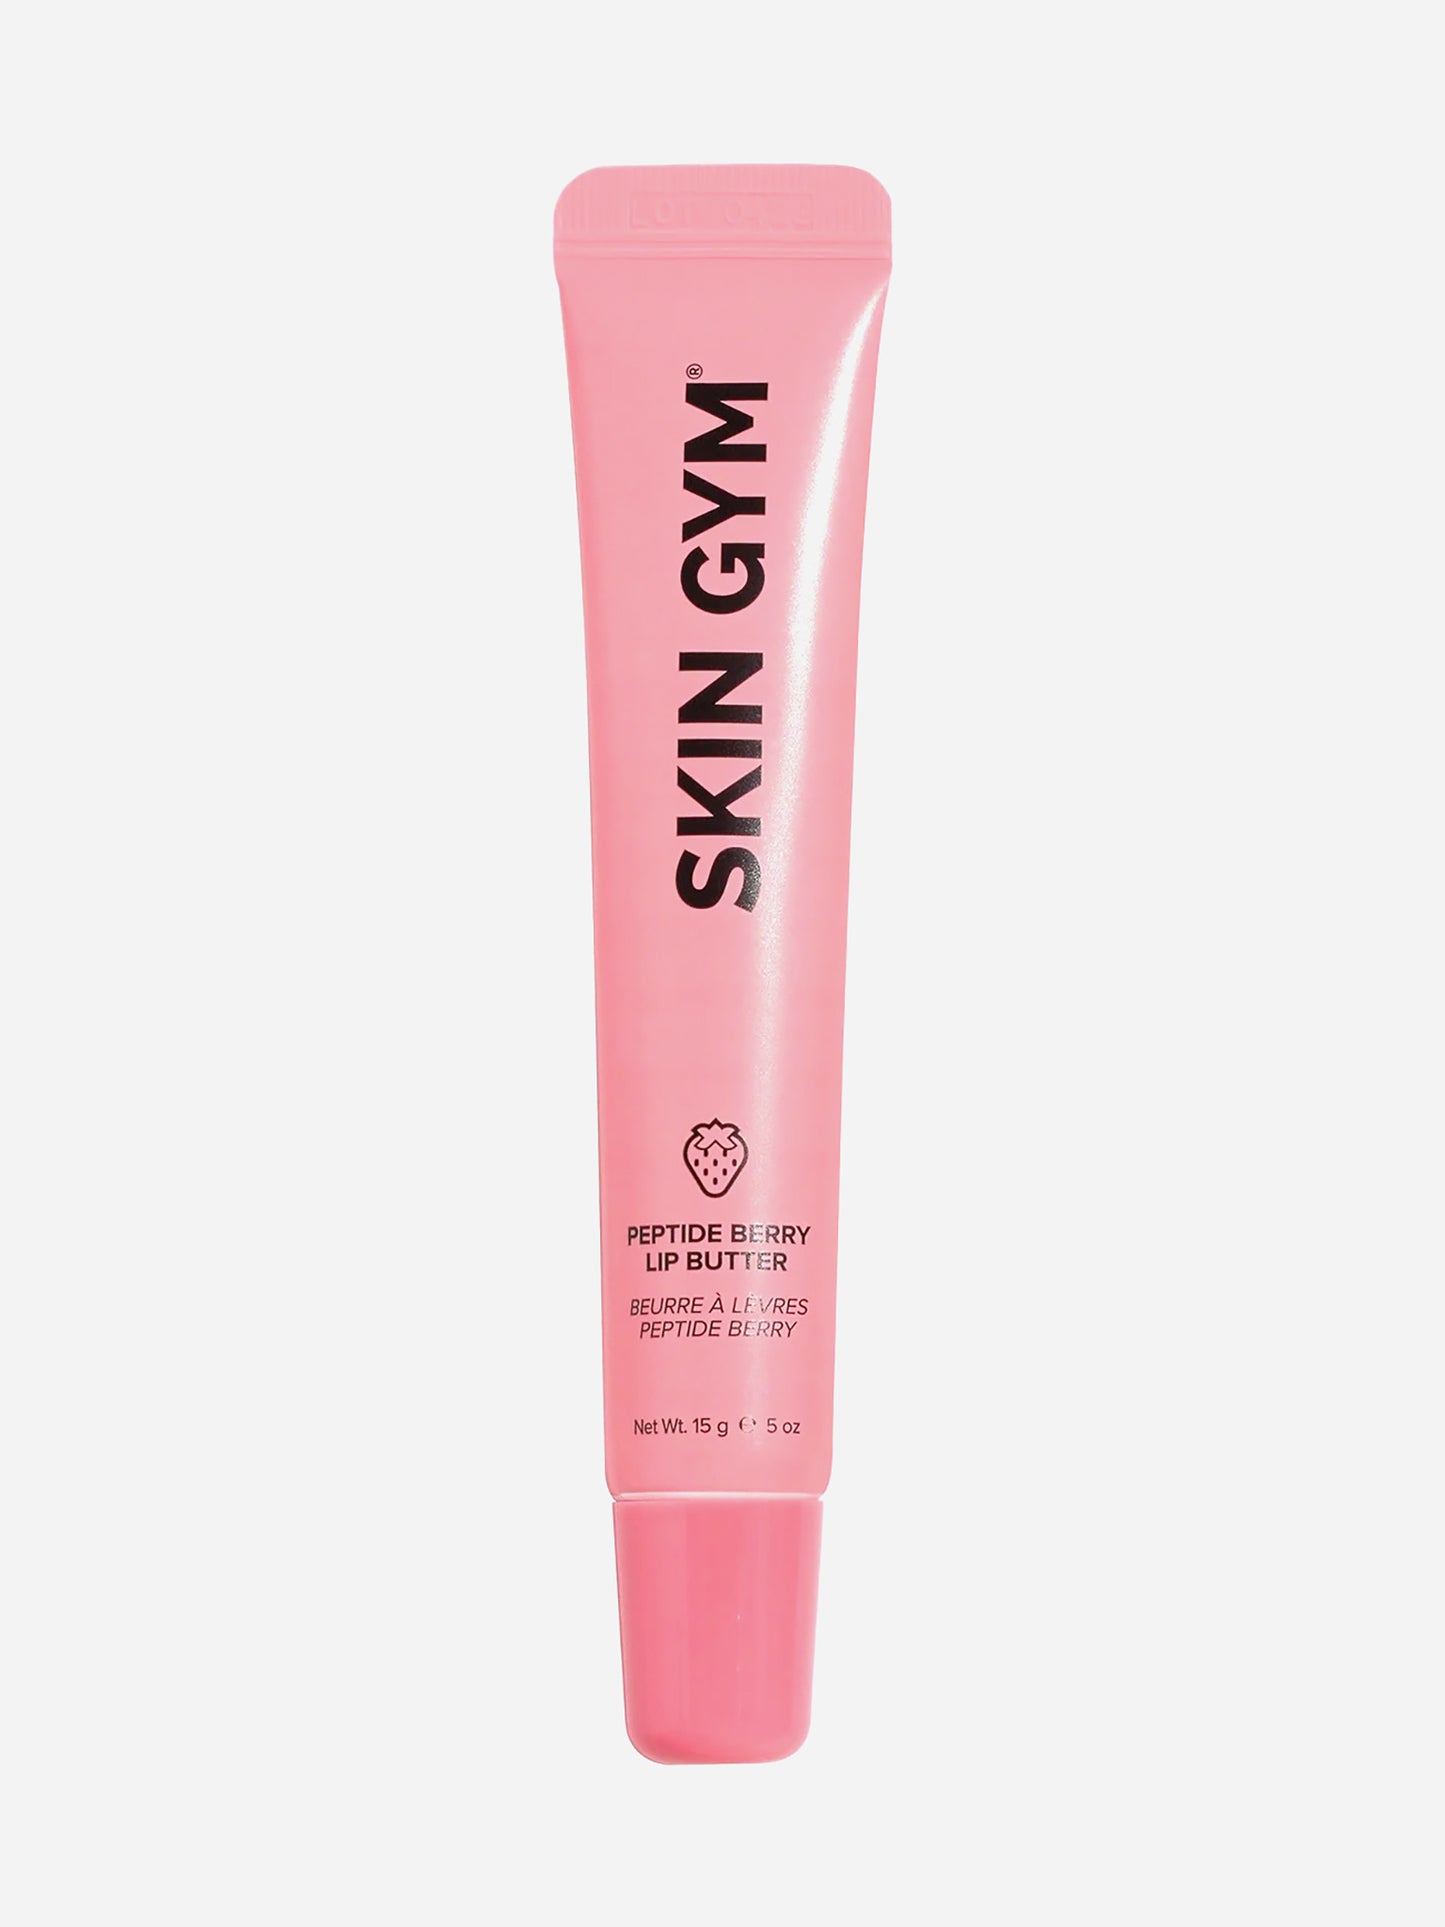 Skin Gym Berry Peptide Lip Butter